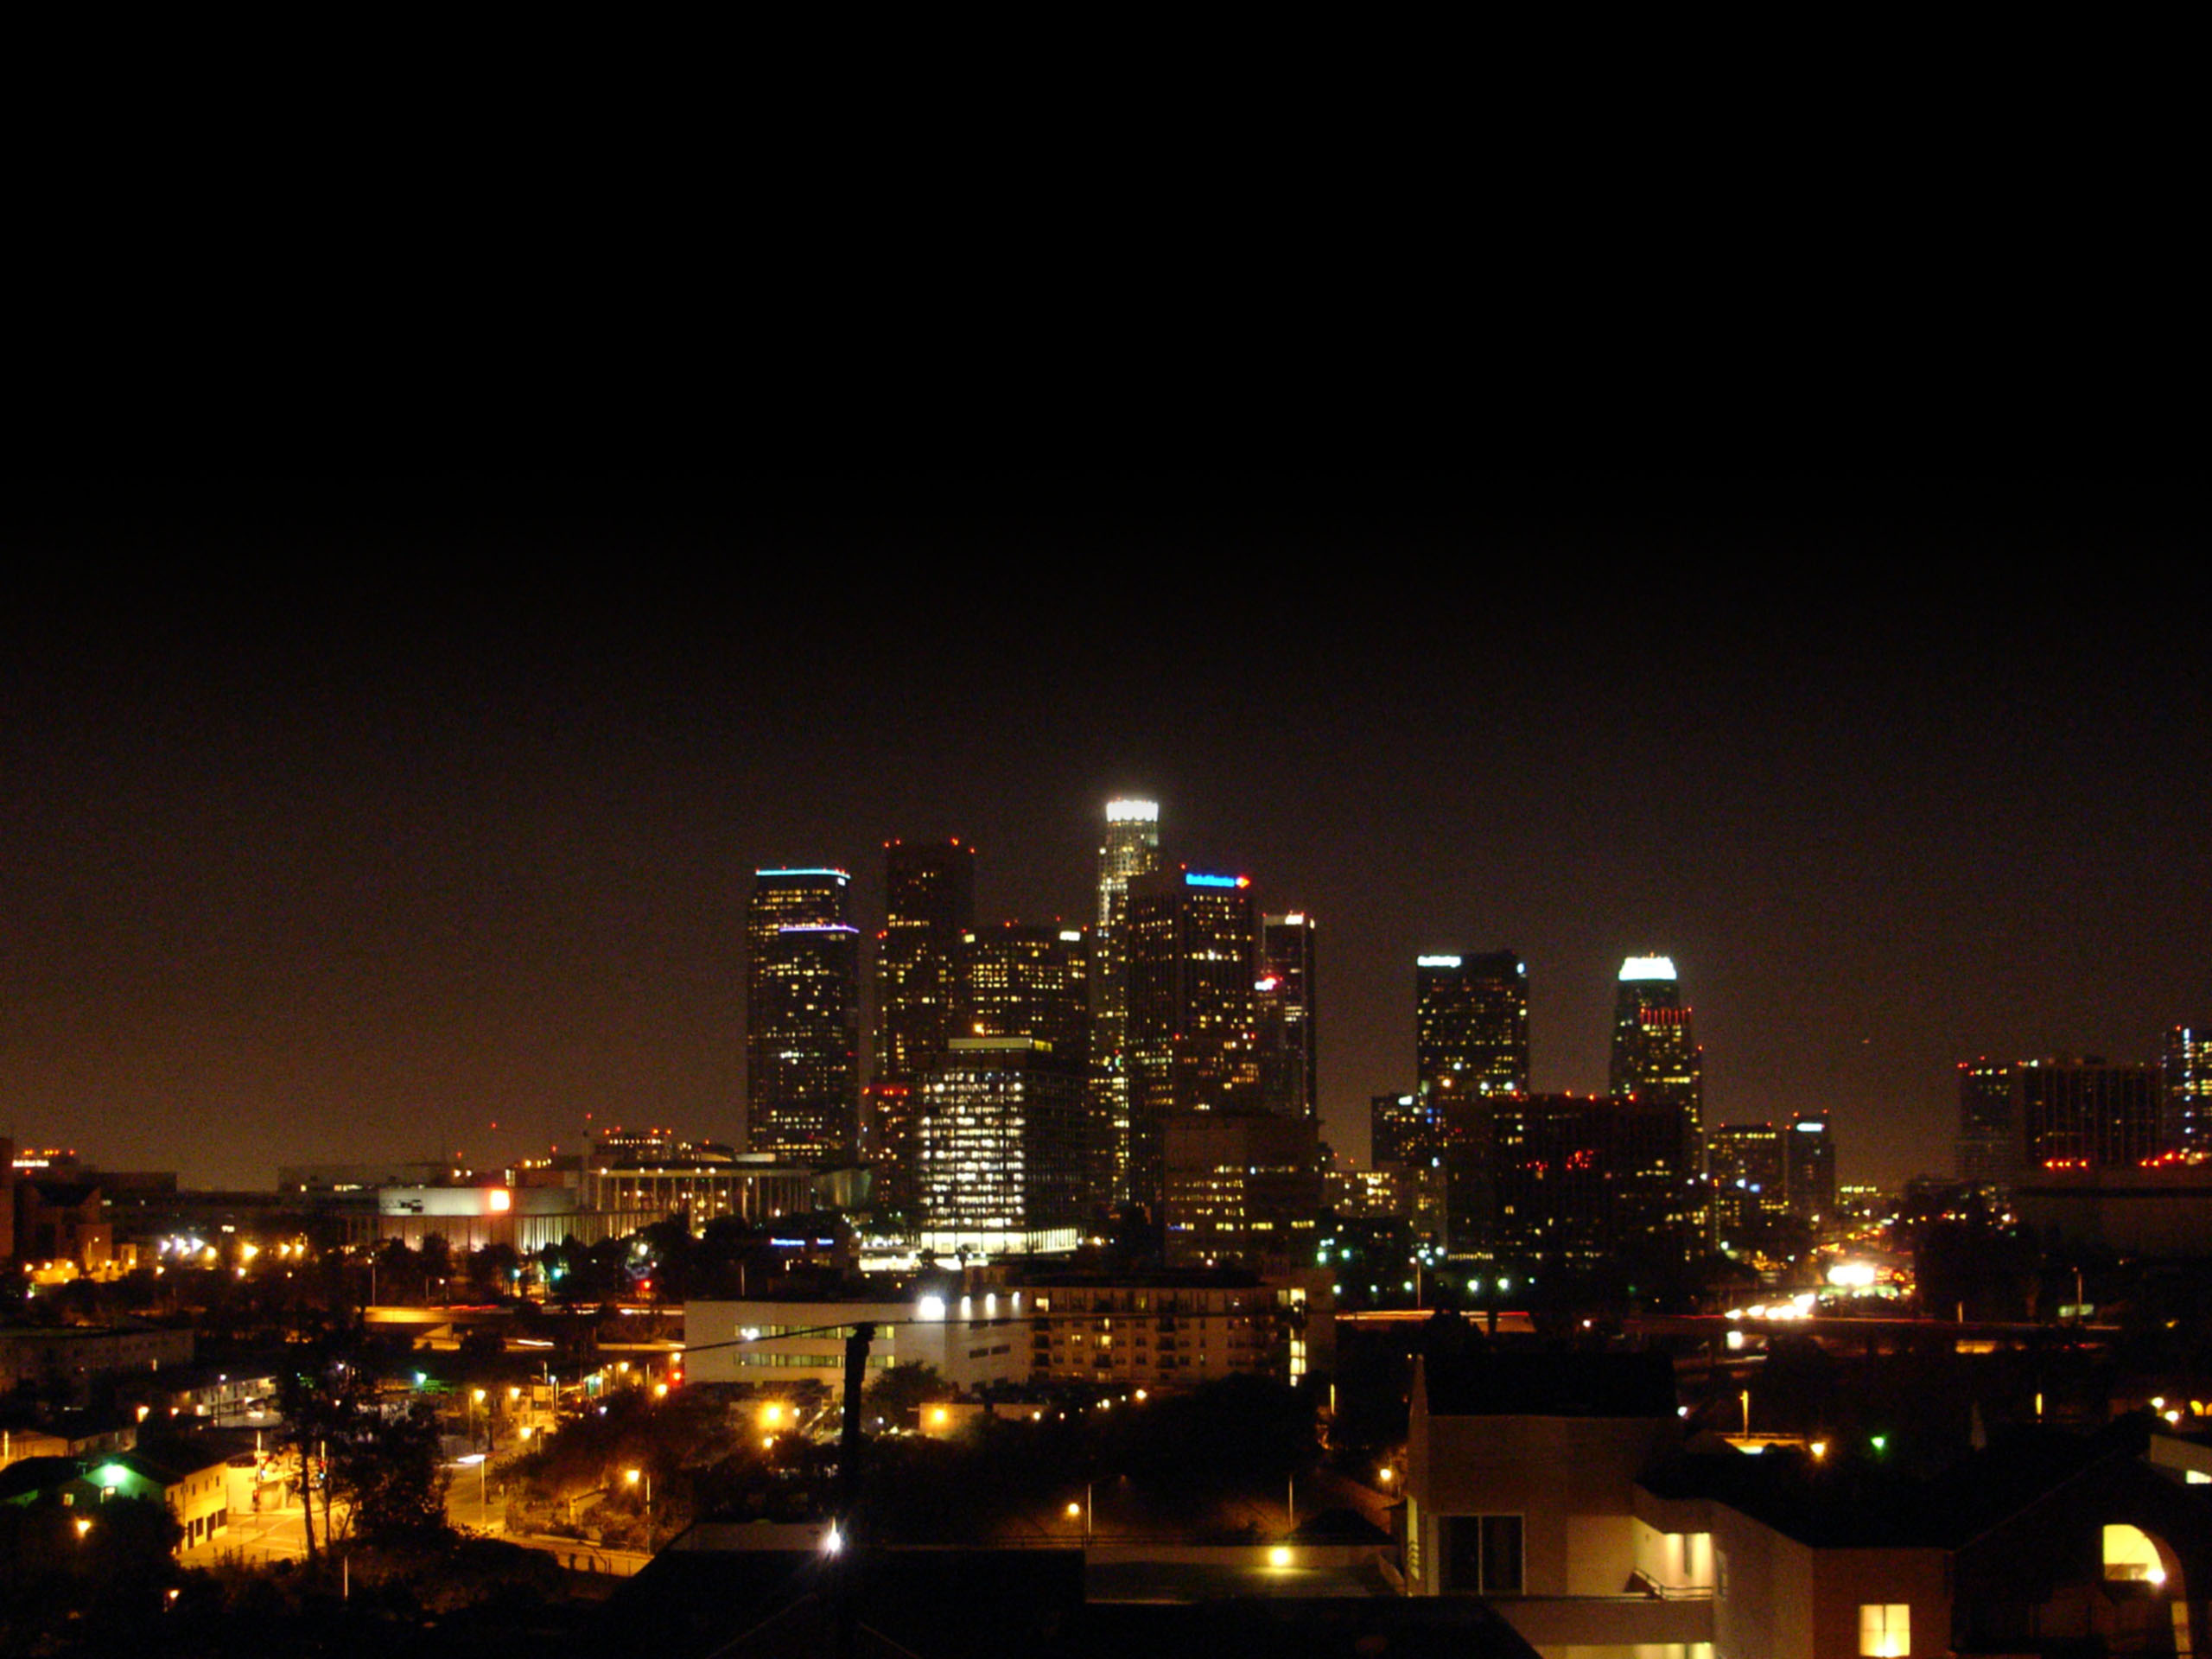 Los Angeles Desktop Wallpaper For HD Widescreen And Mobile